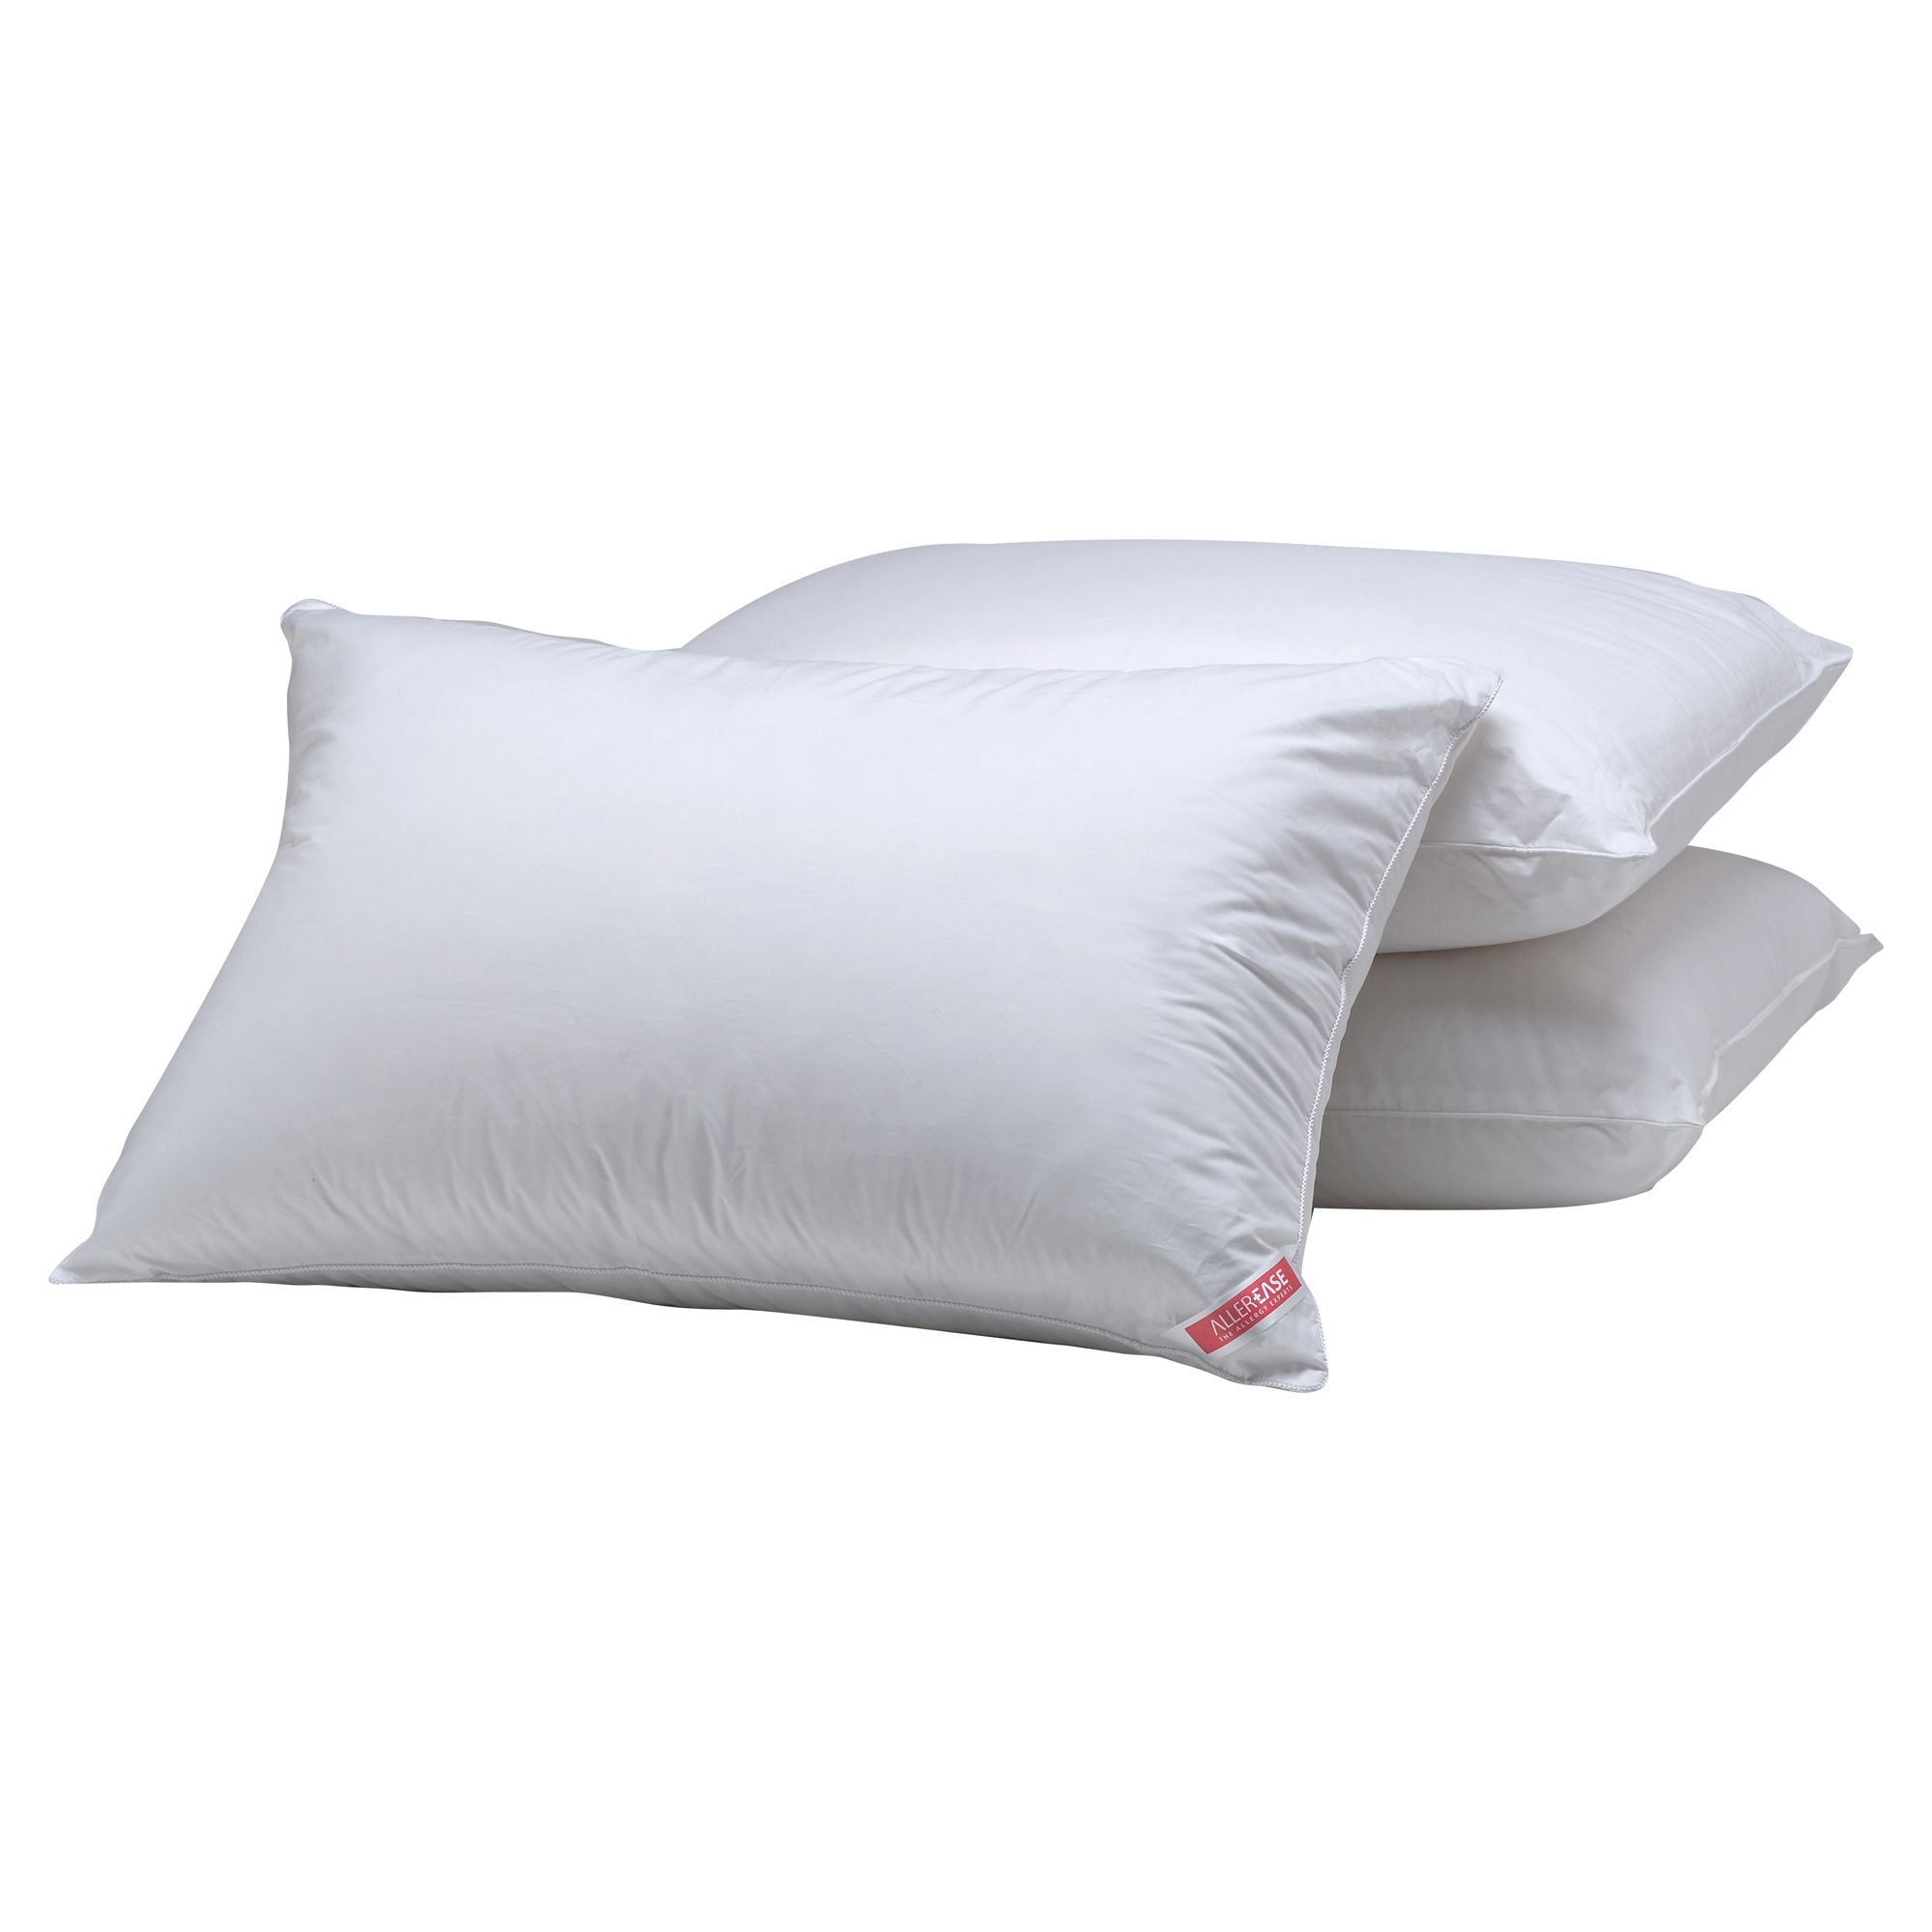 Allerease Double Cover Pillow